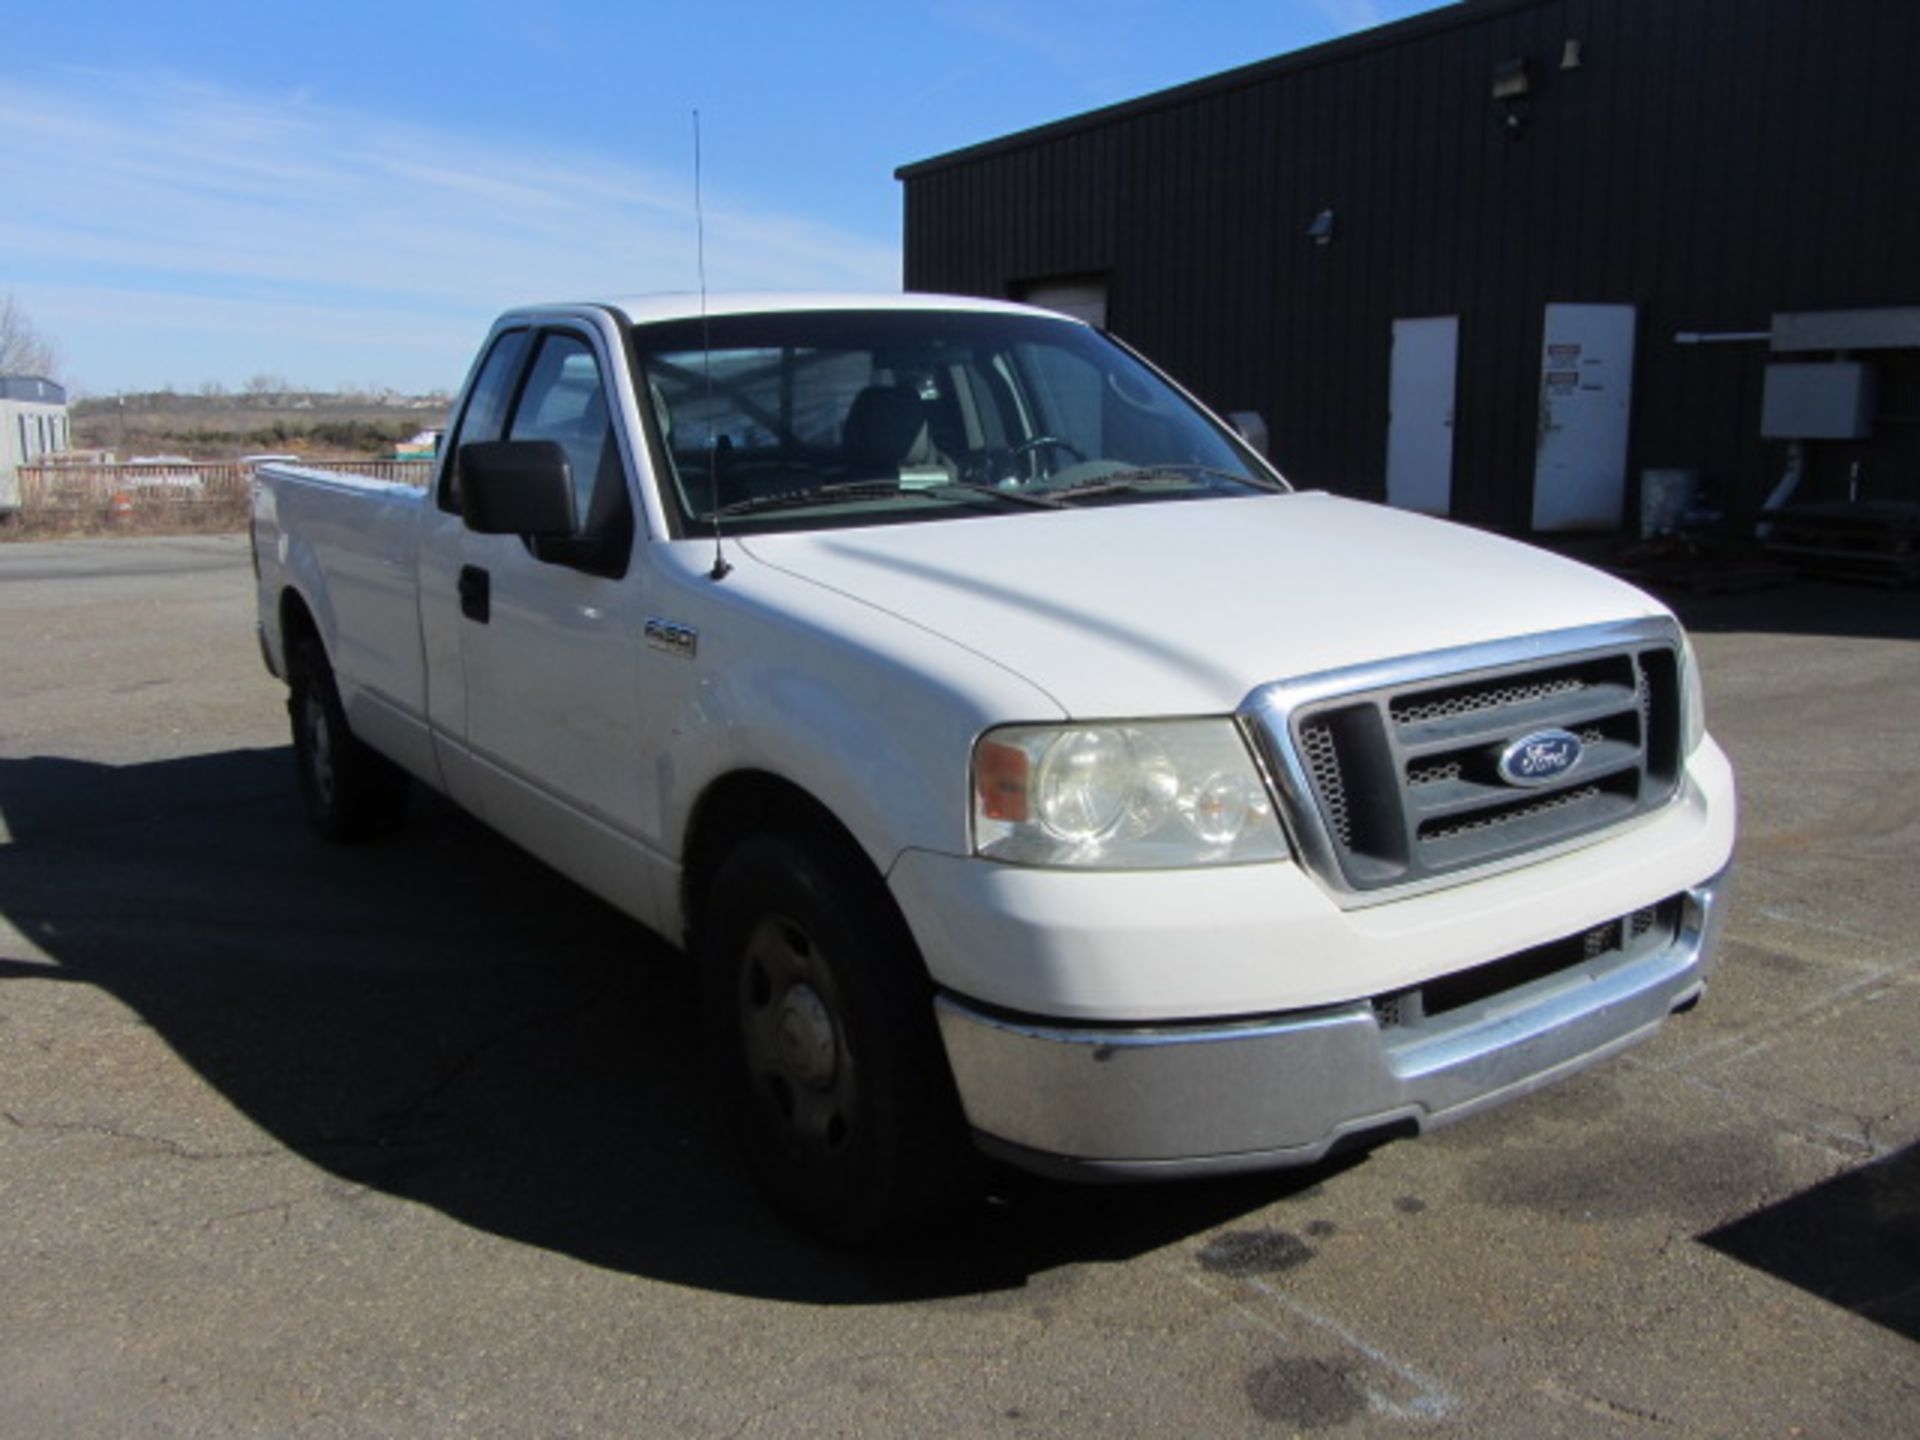 Ford F-150 XLT Triton Pick-Up Truck with 8' Bed, Automatic Transmission, AC & Heat, vin: - Image 4 of 8